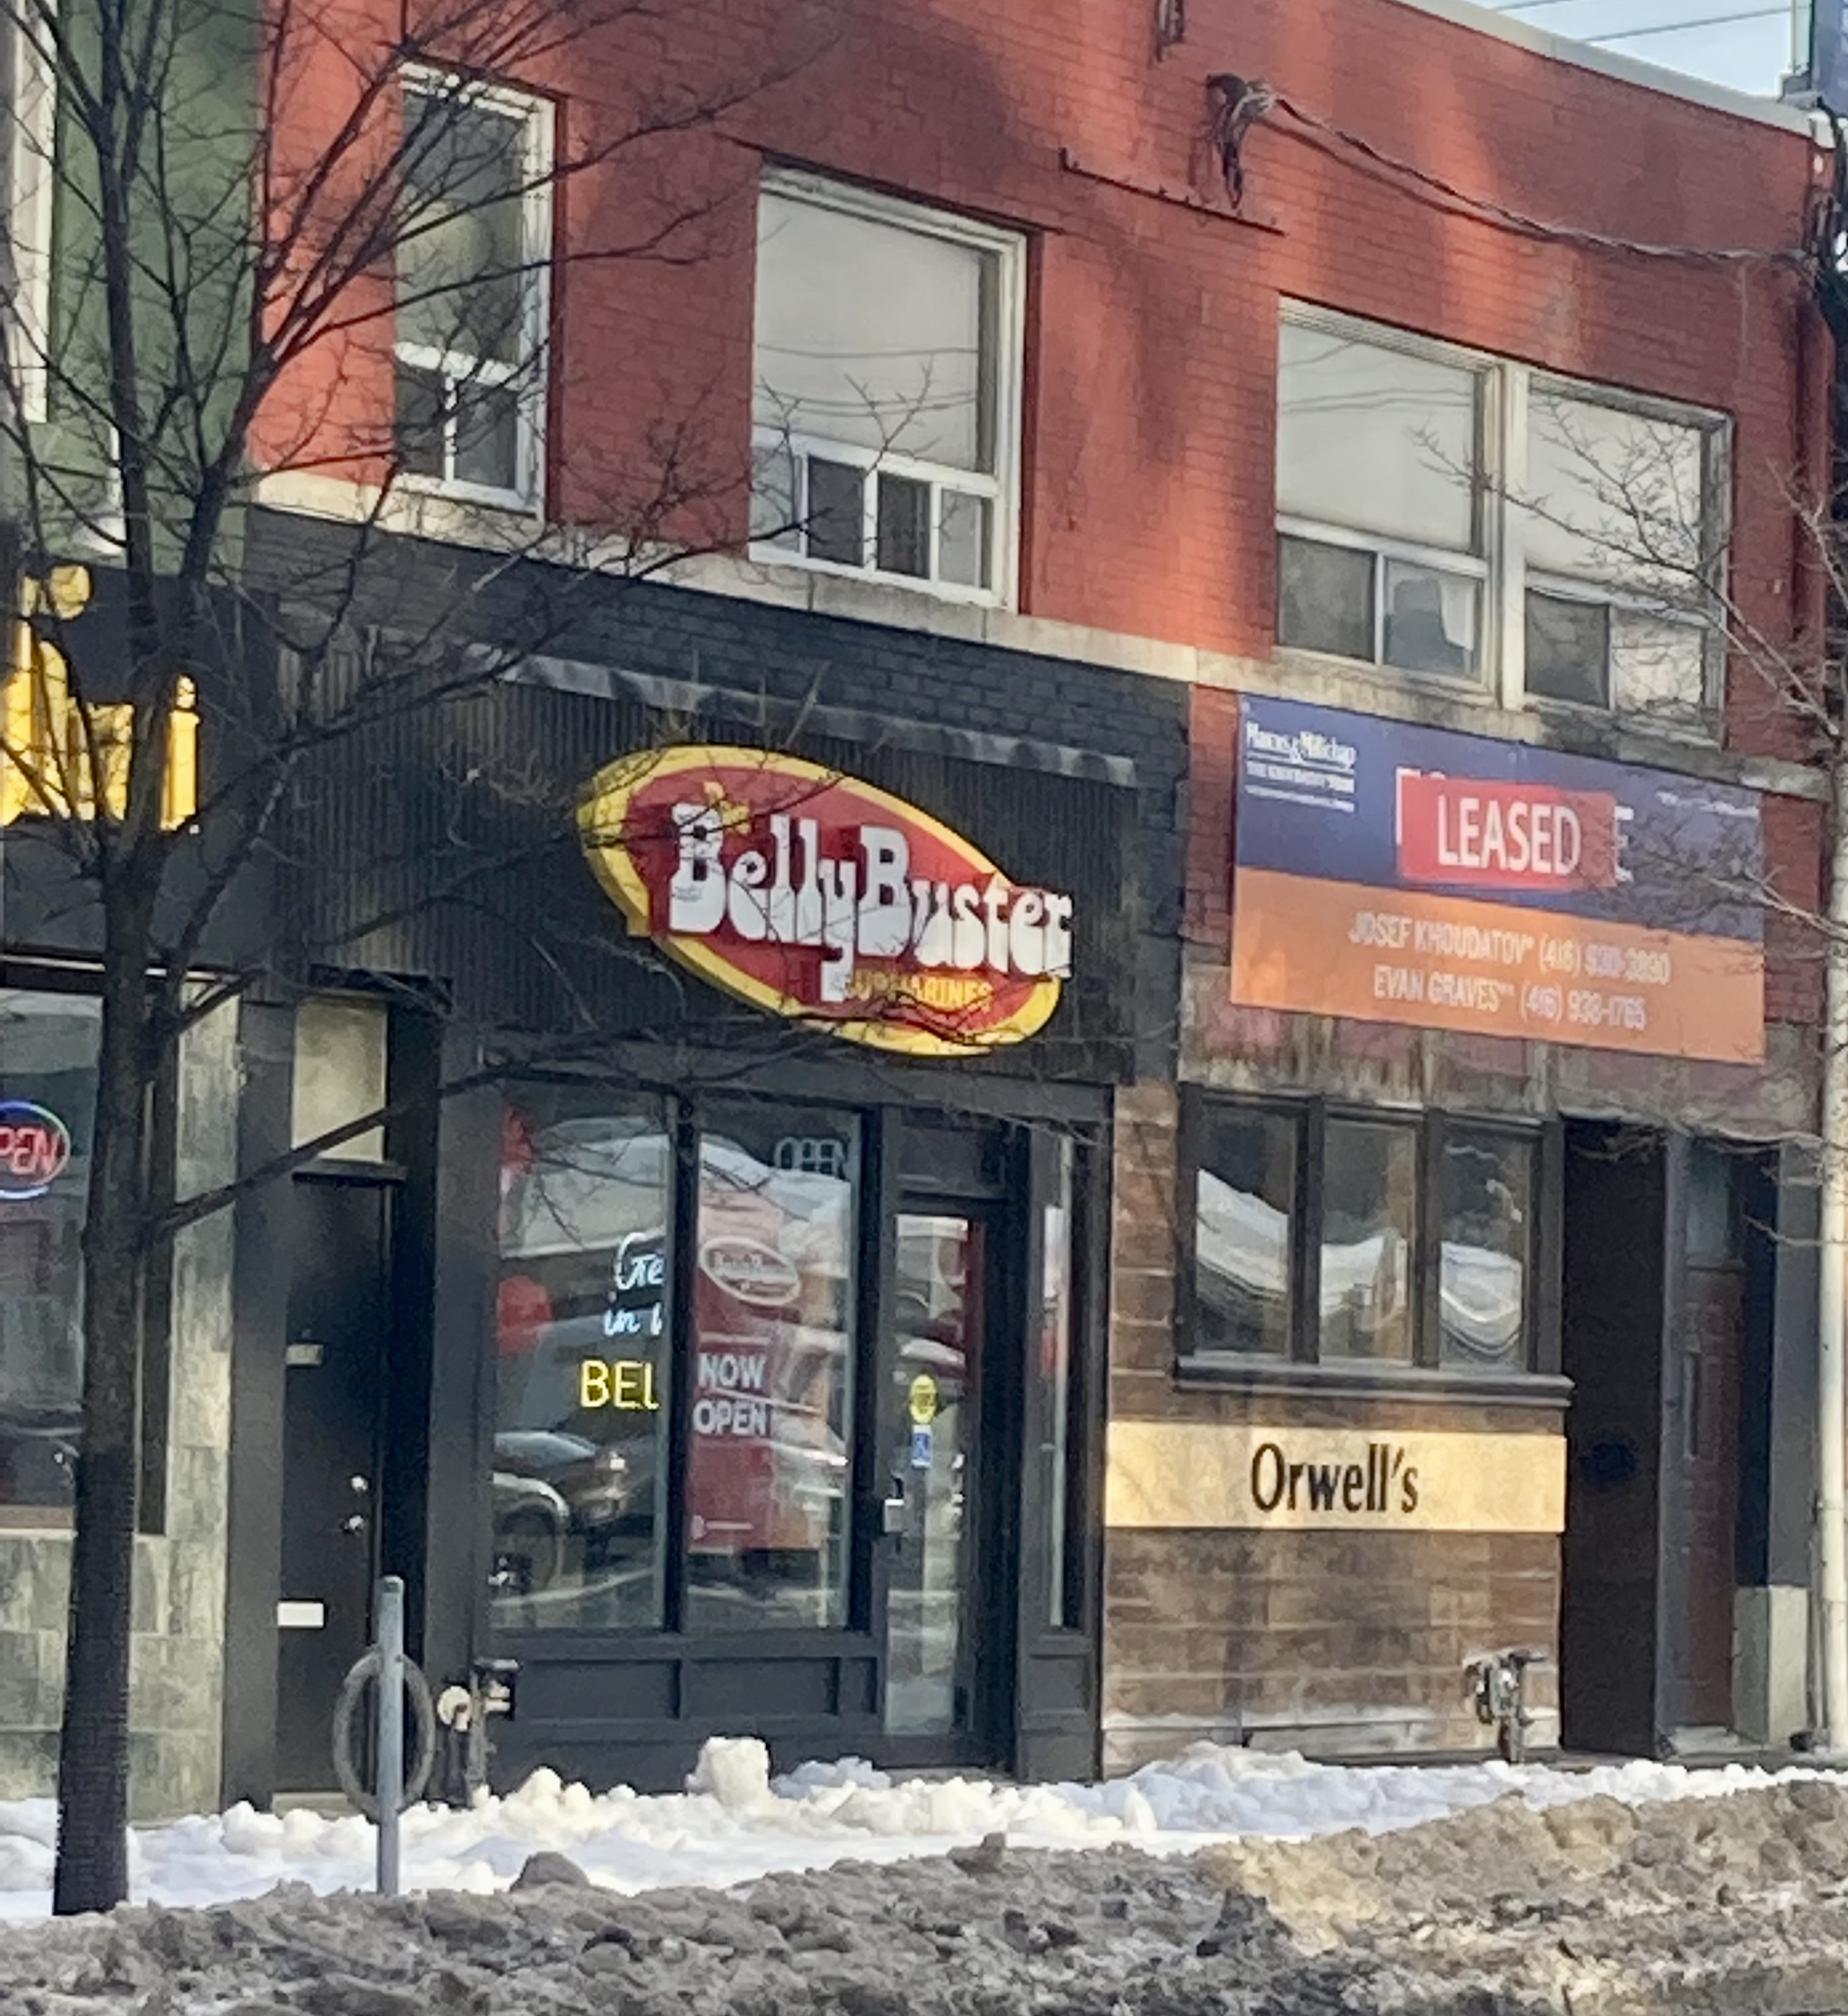 Just Opened: Belly Buster Submarines on Bloor St. West